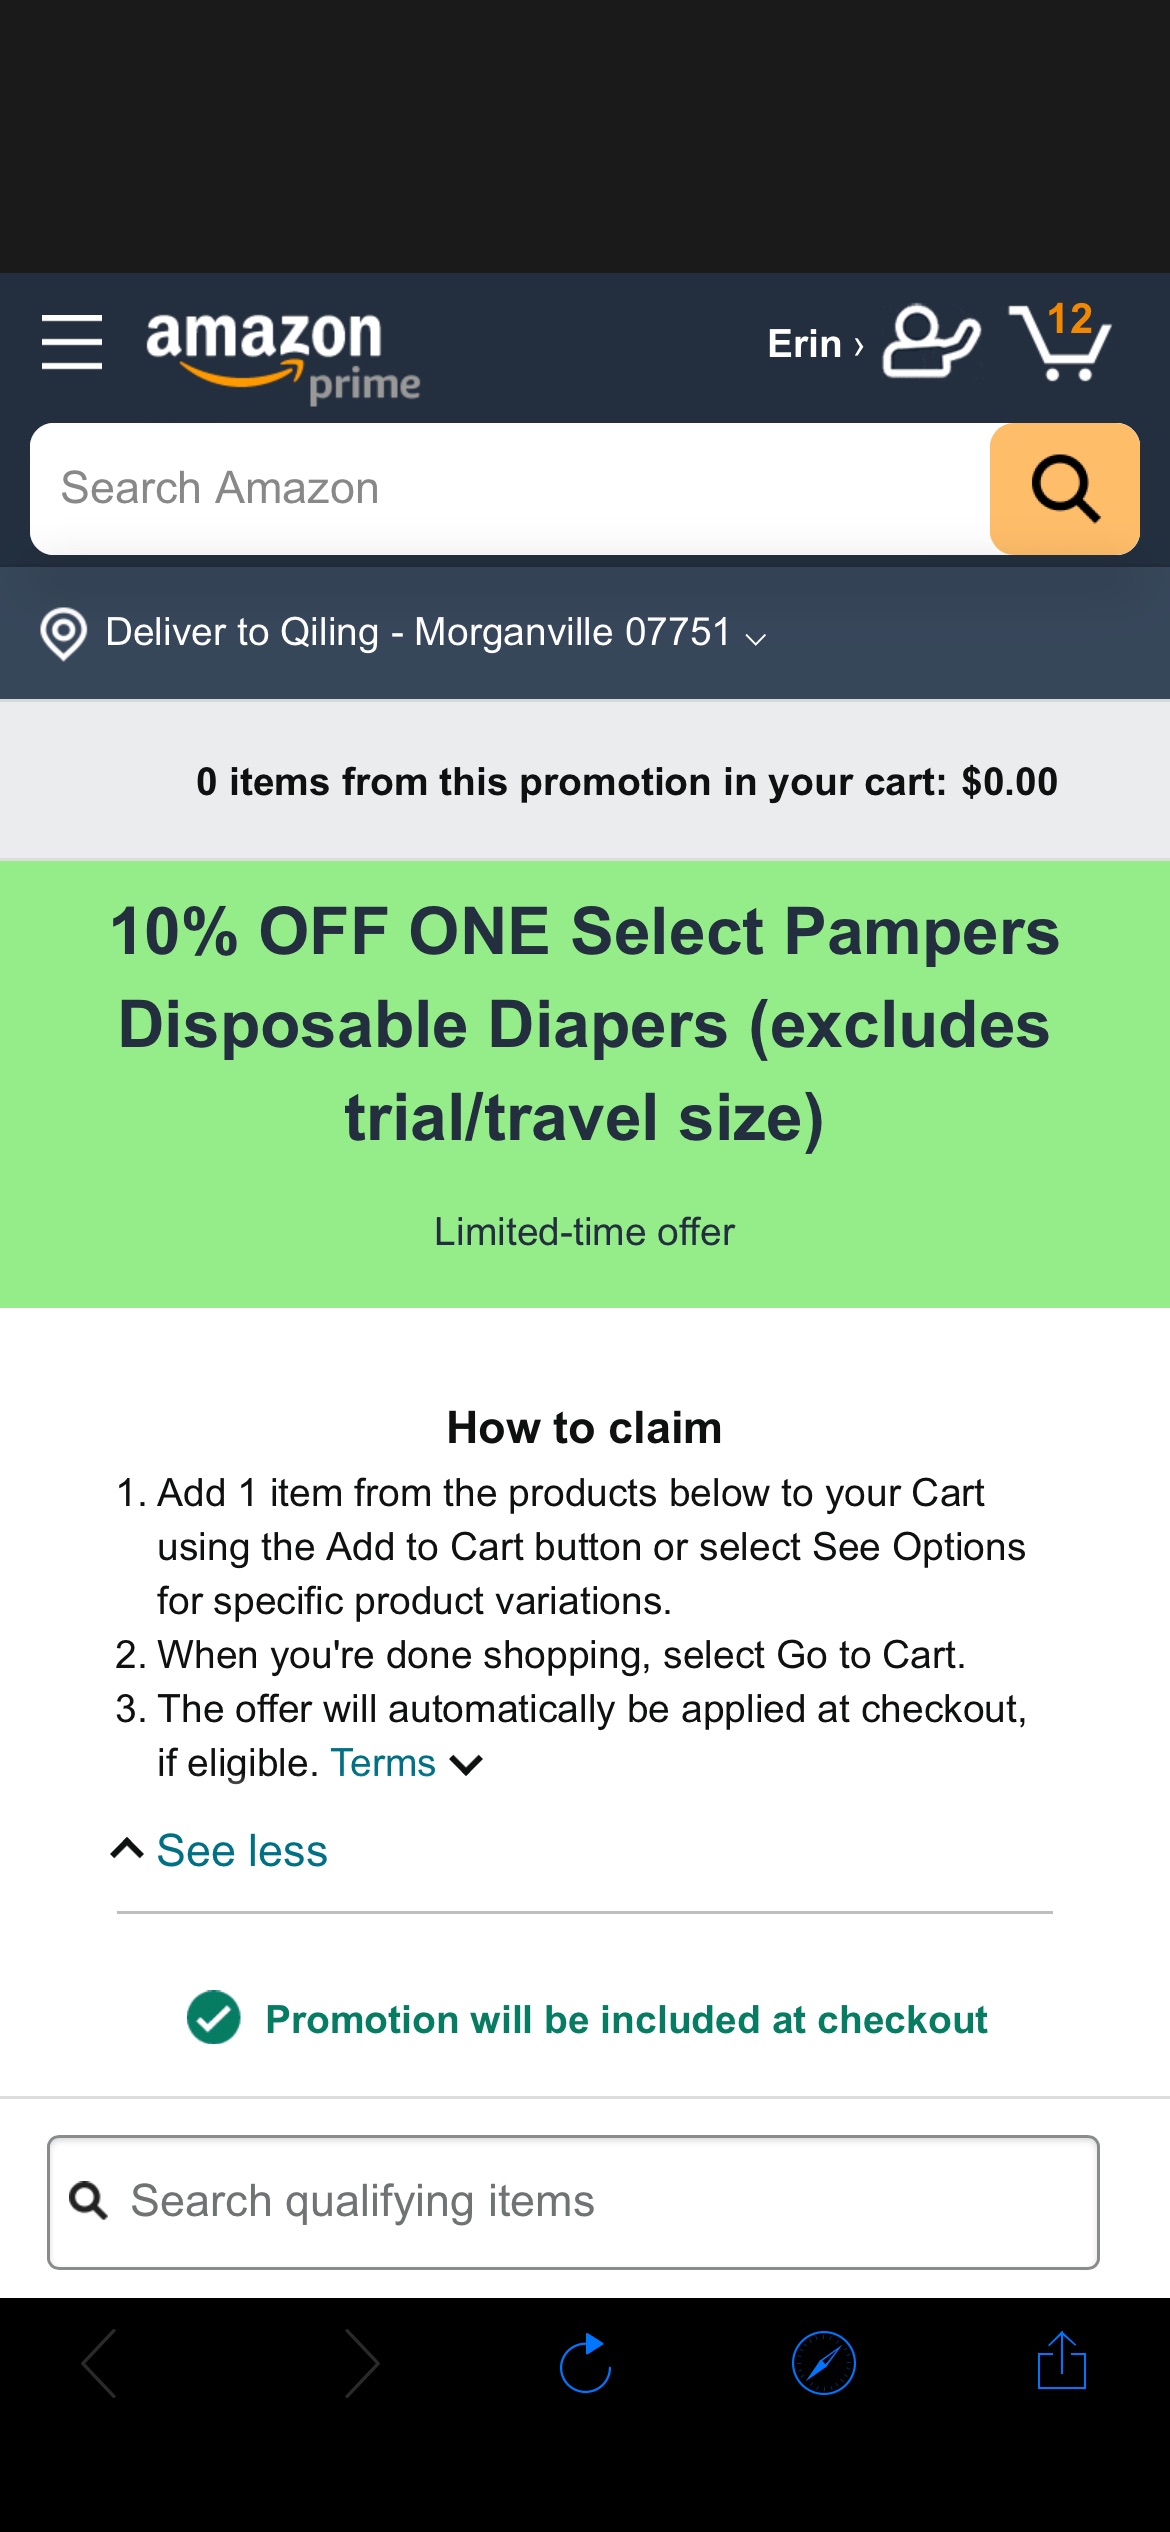 Amazon.com: 10% OFF ONE Select Pampers Disposable Diapers (excludes trial/travel size) promotion